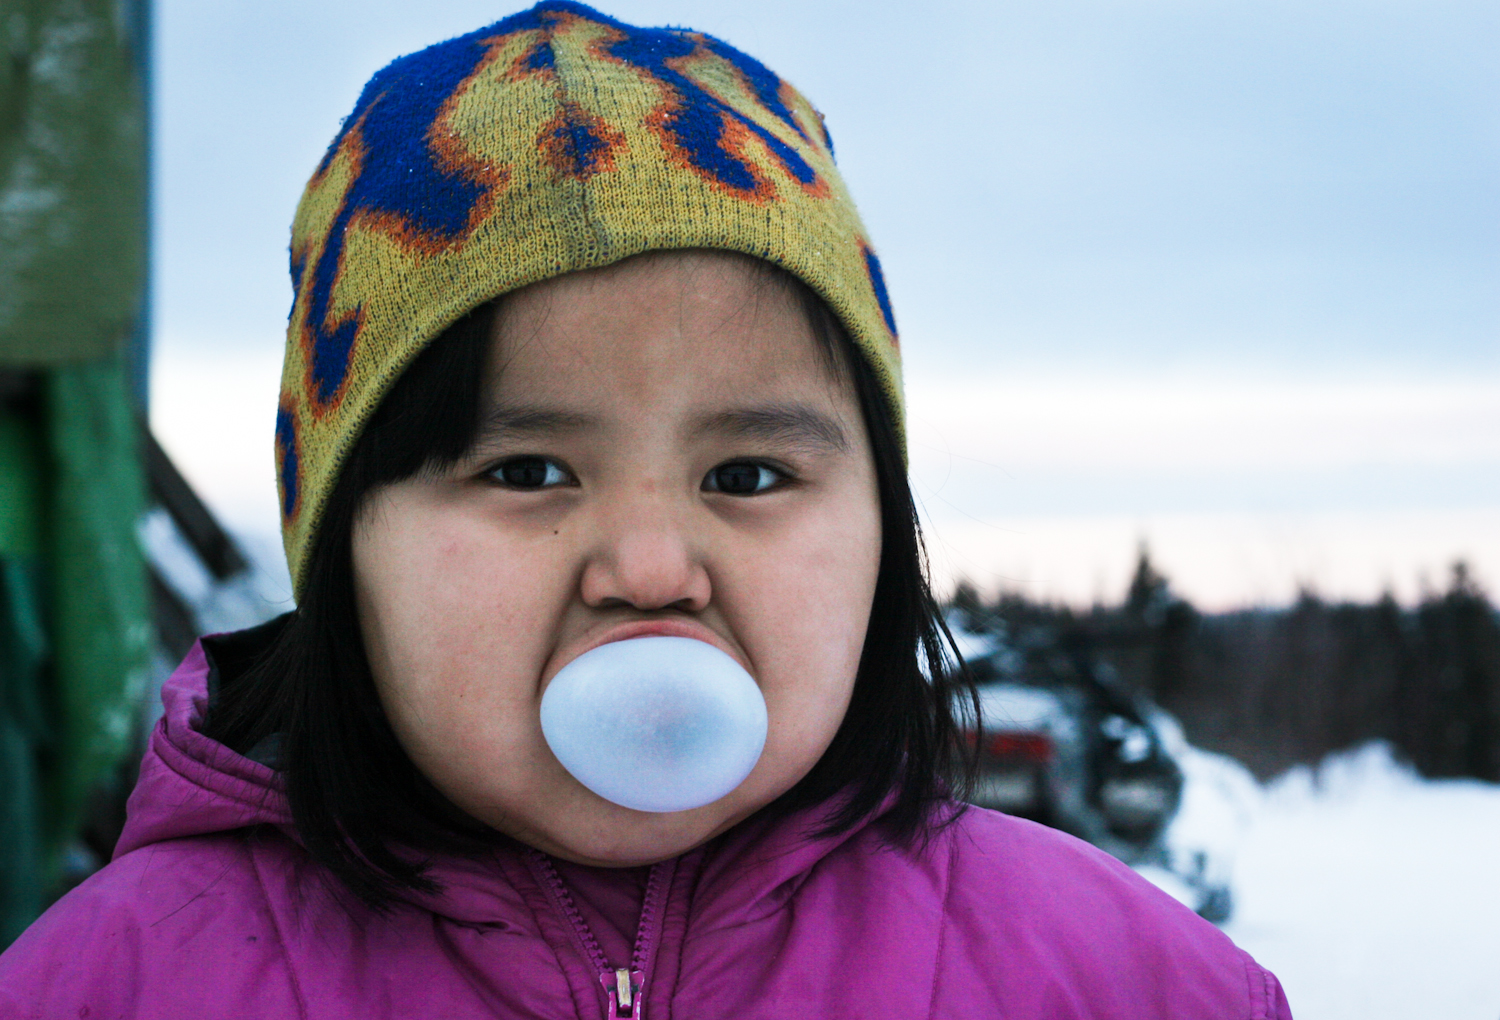   Alice Brown, 6, blows a bubble outside in negative 20 temperatures.  